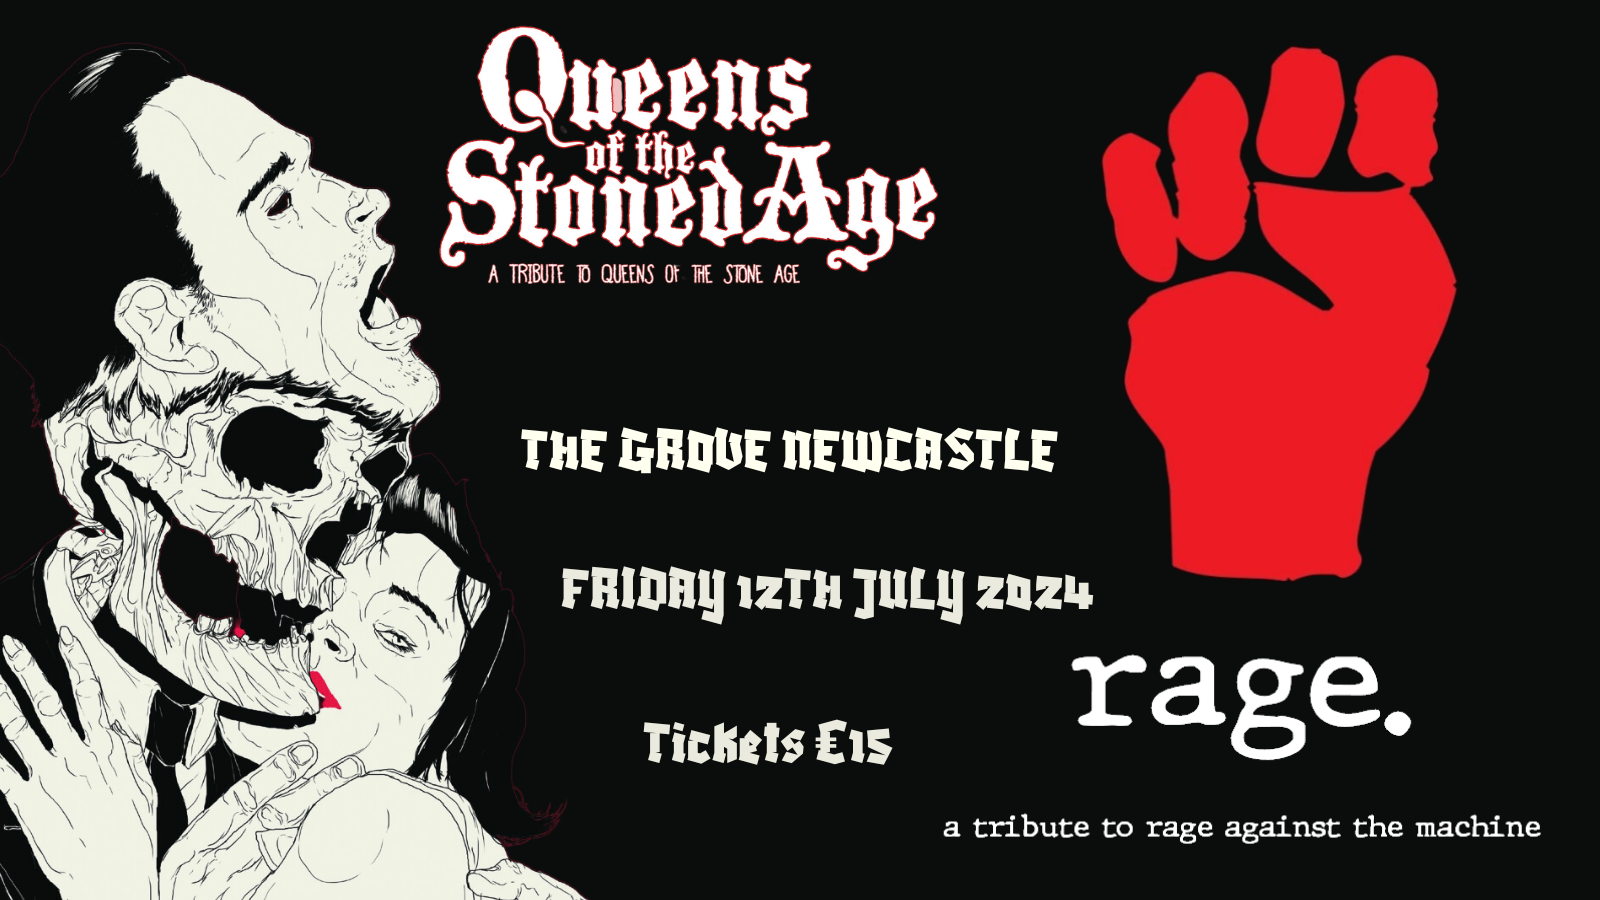 Queens of the Stoned Age and Rage